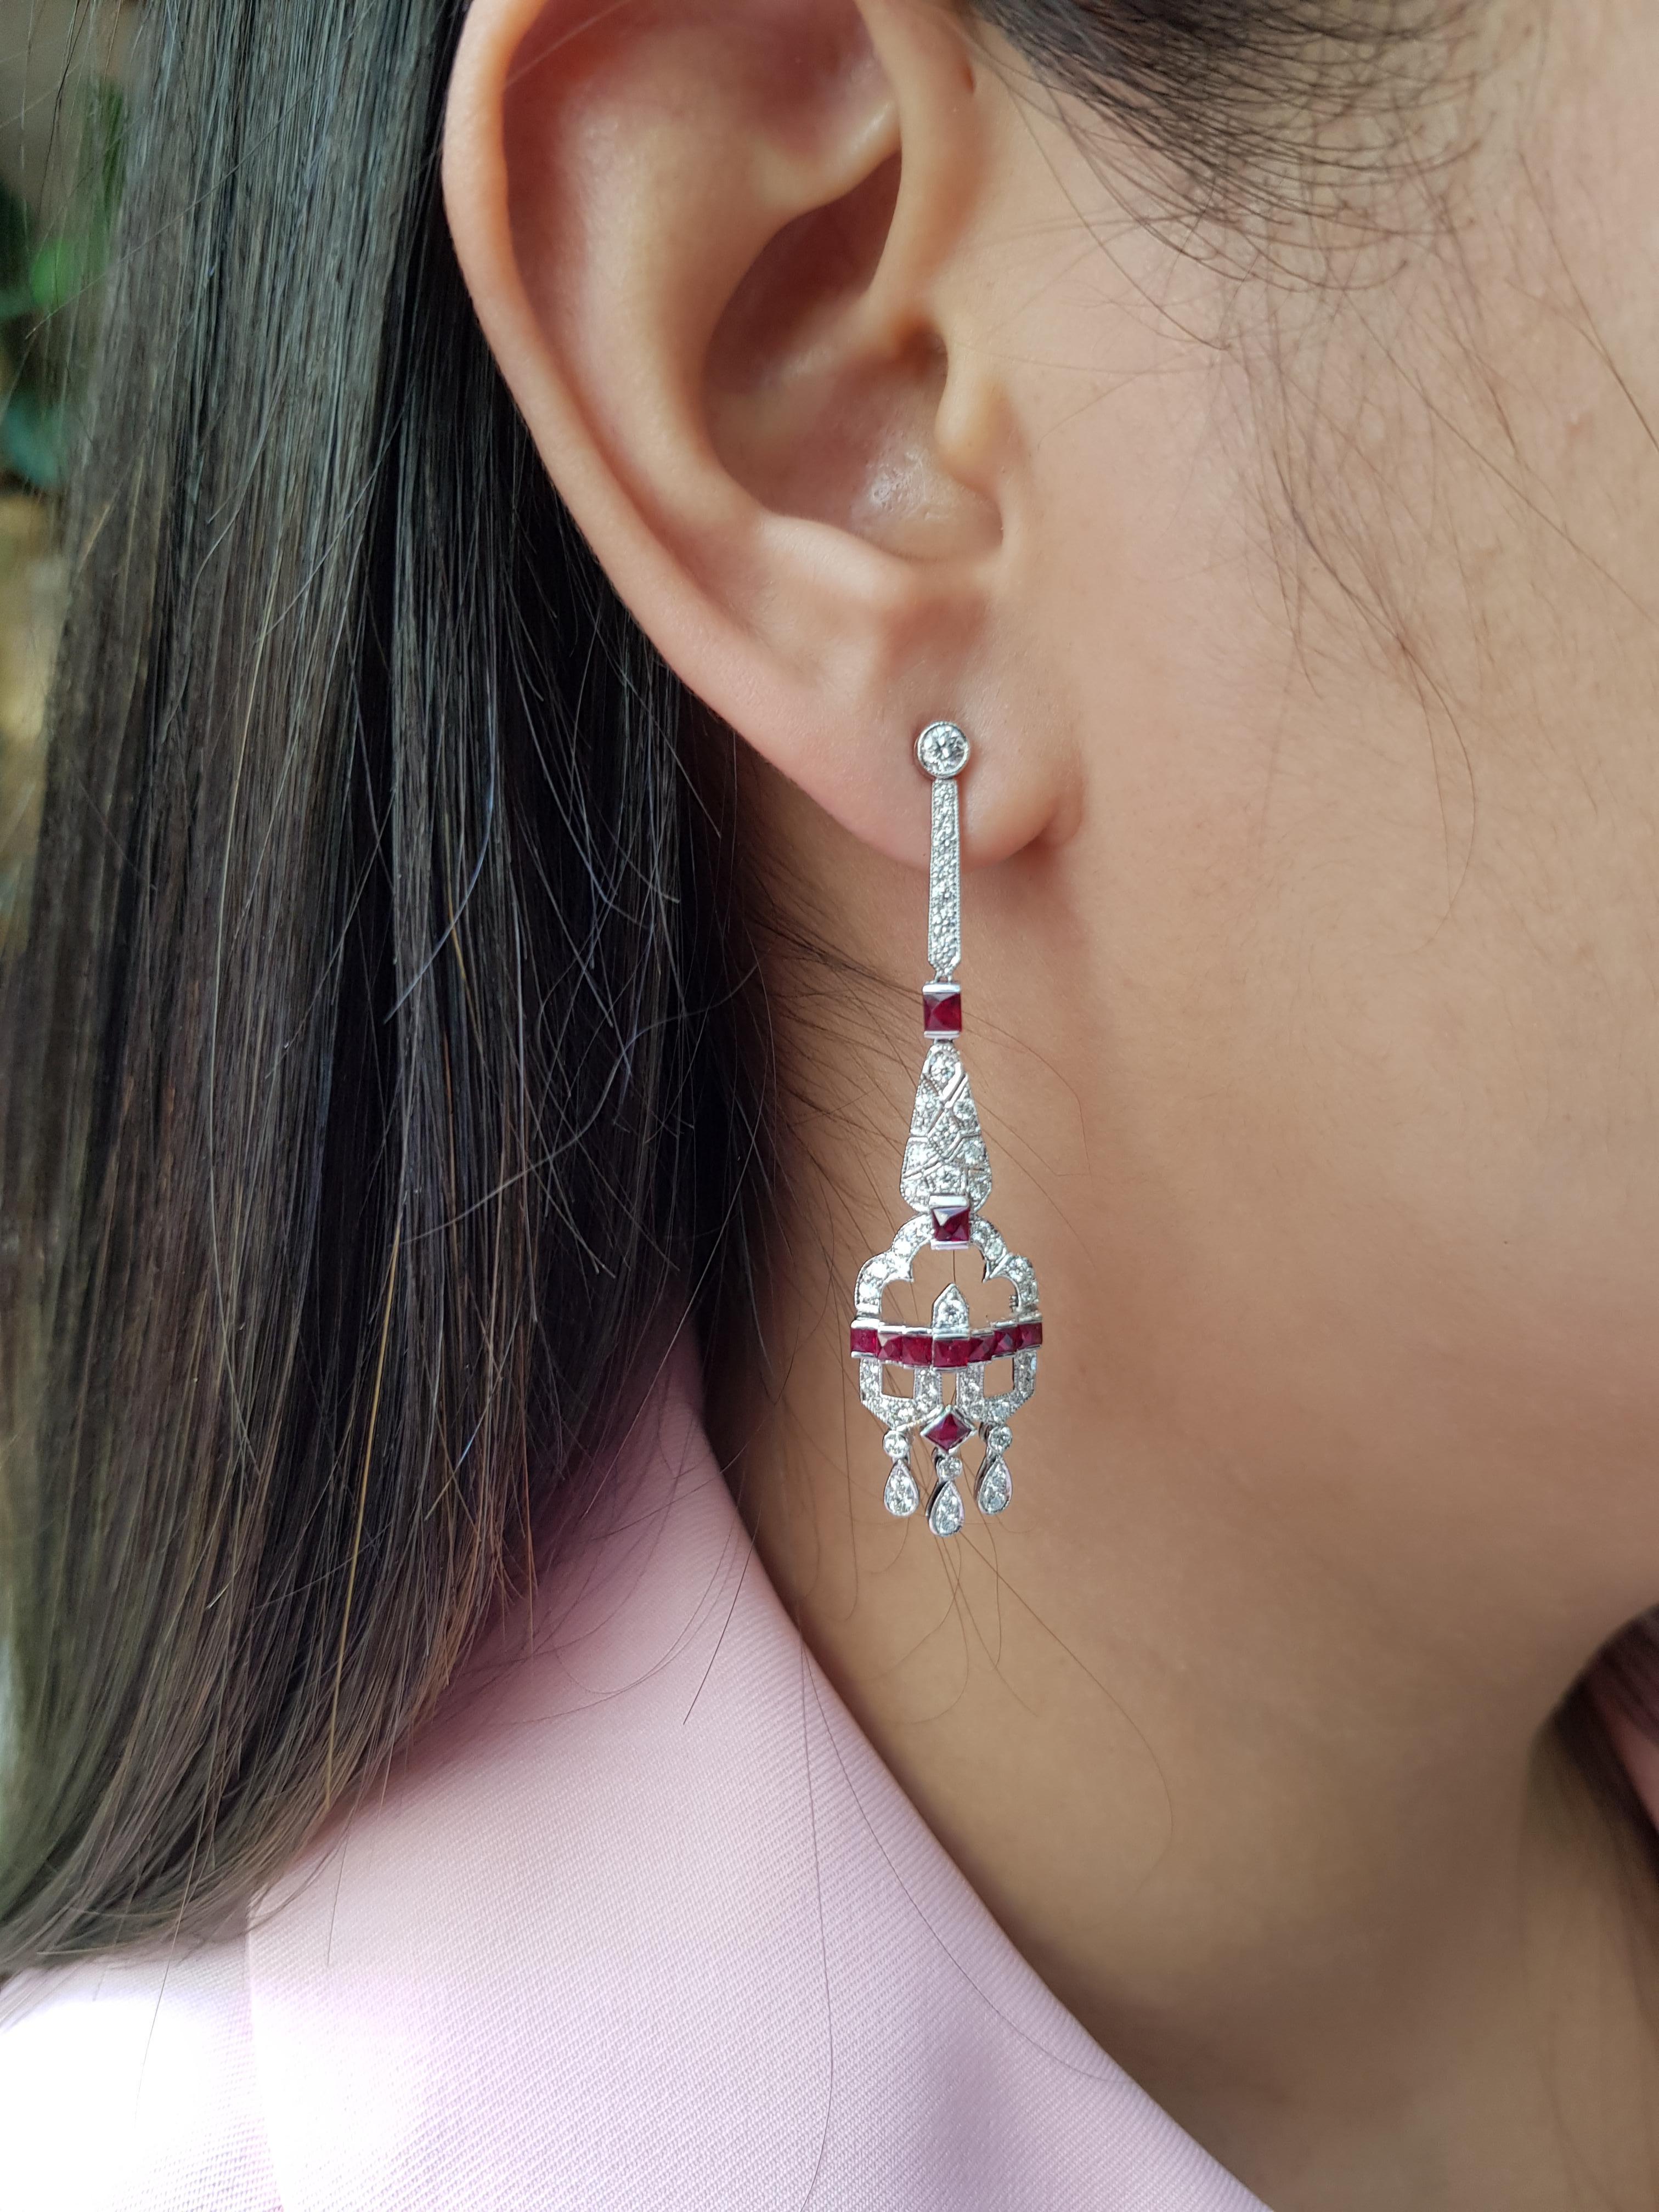 Ruby 1.97 carats with Diamond 1.42 carats Earrings set in 18 Karat White Gold Settings

Width: 1.3 cm
Length: 5.5 cm 

